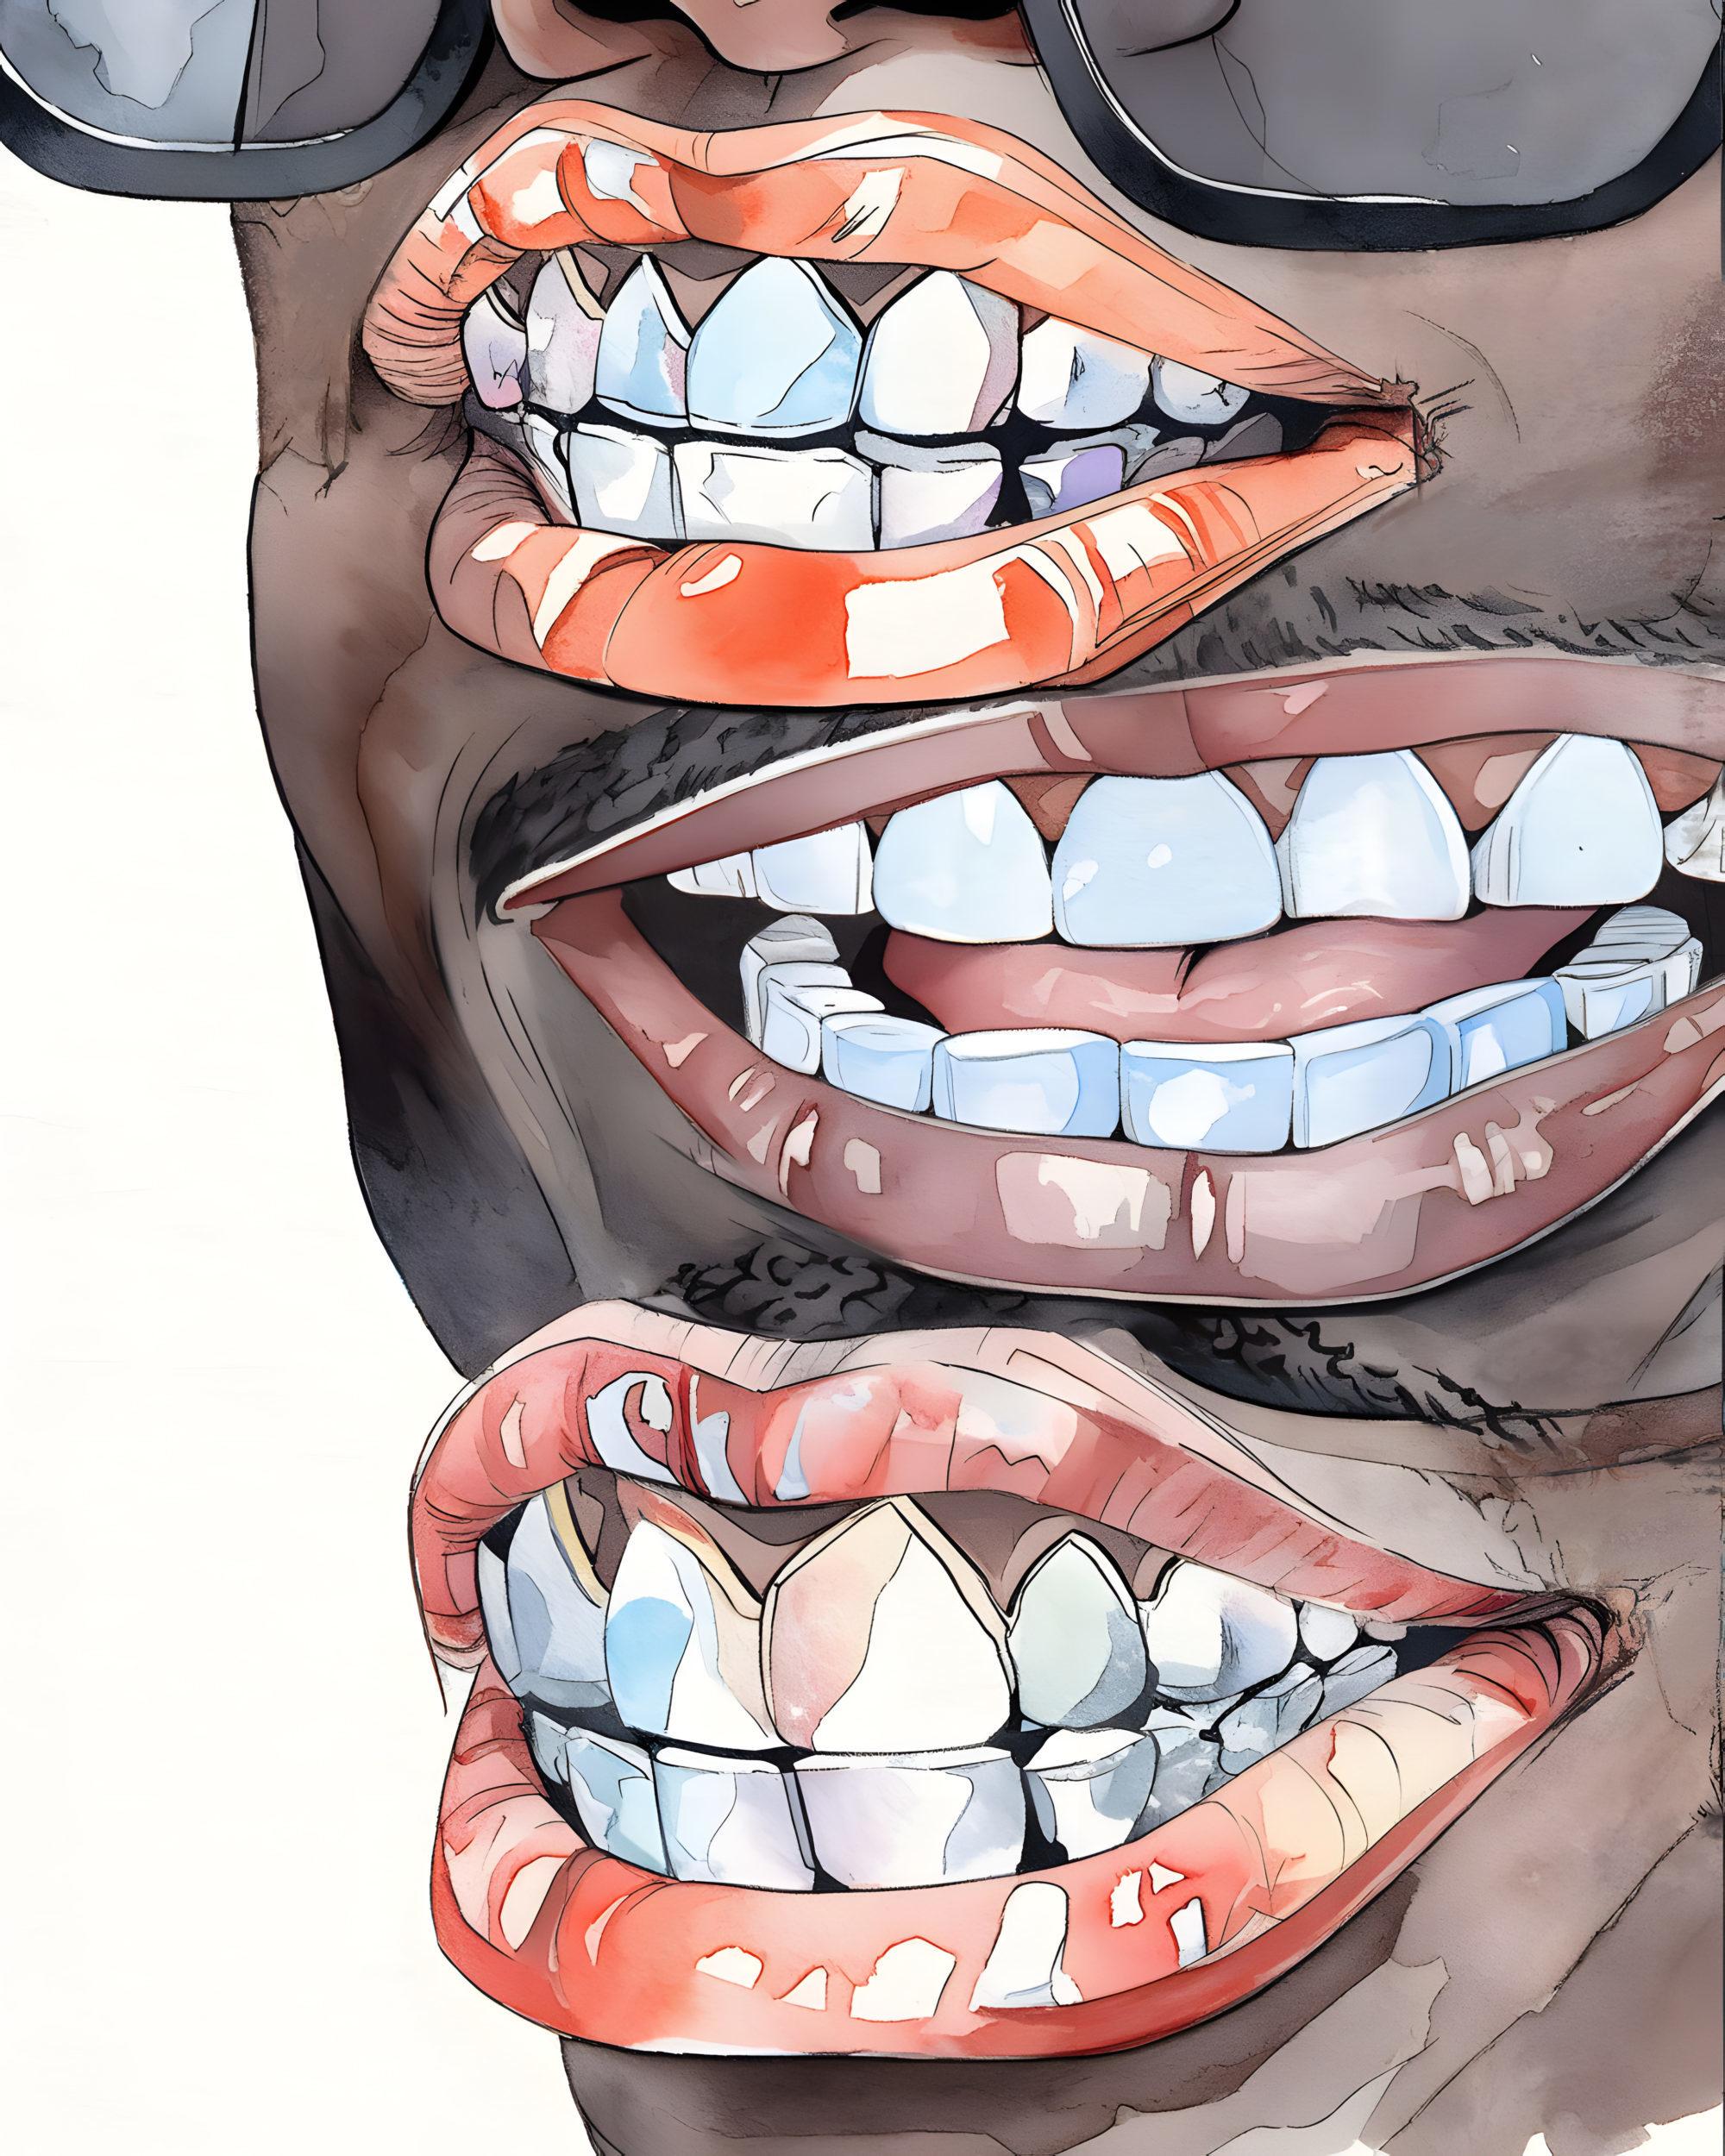 MOUTHPIECE: ONE FACE, MANY VOICES watercolor illustration by artist Matt Medley